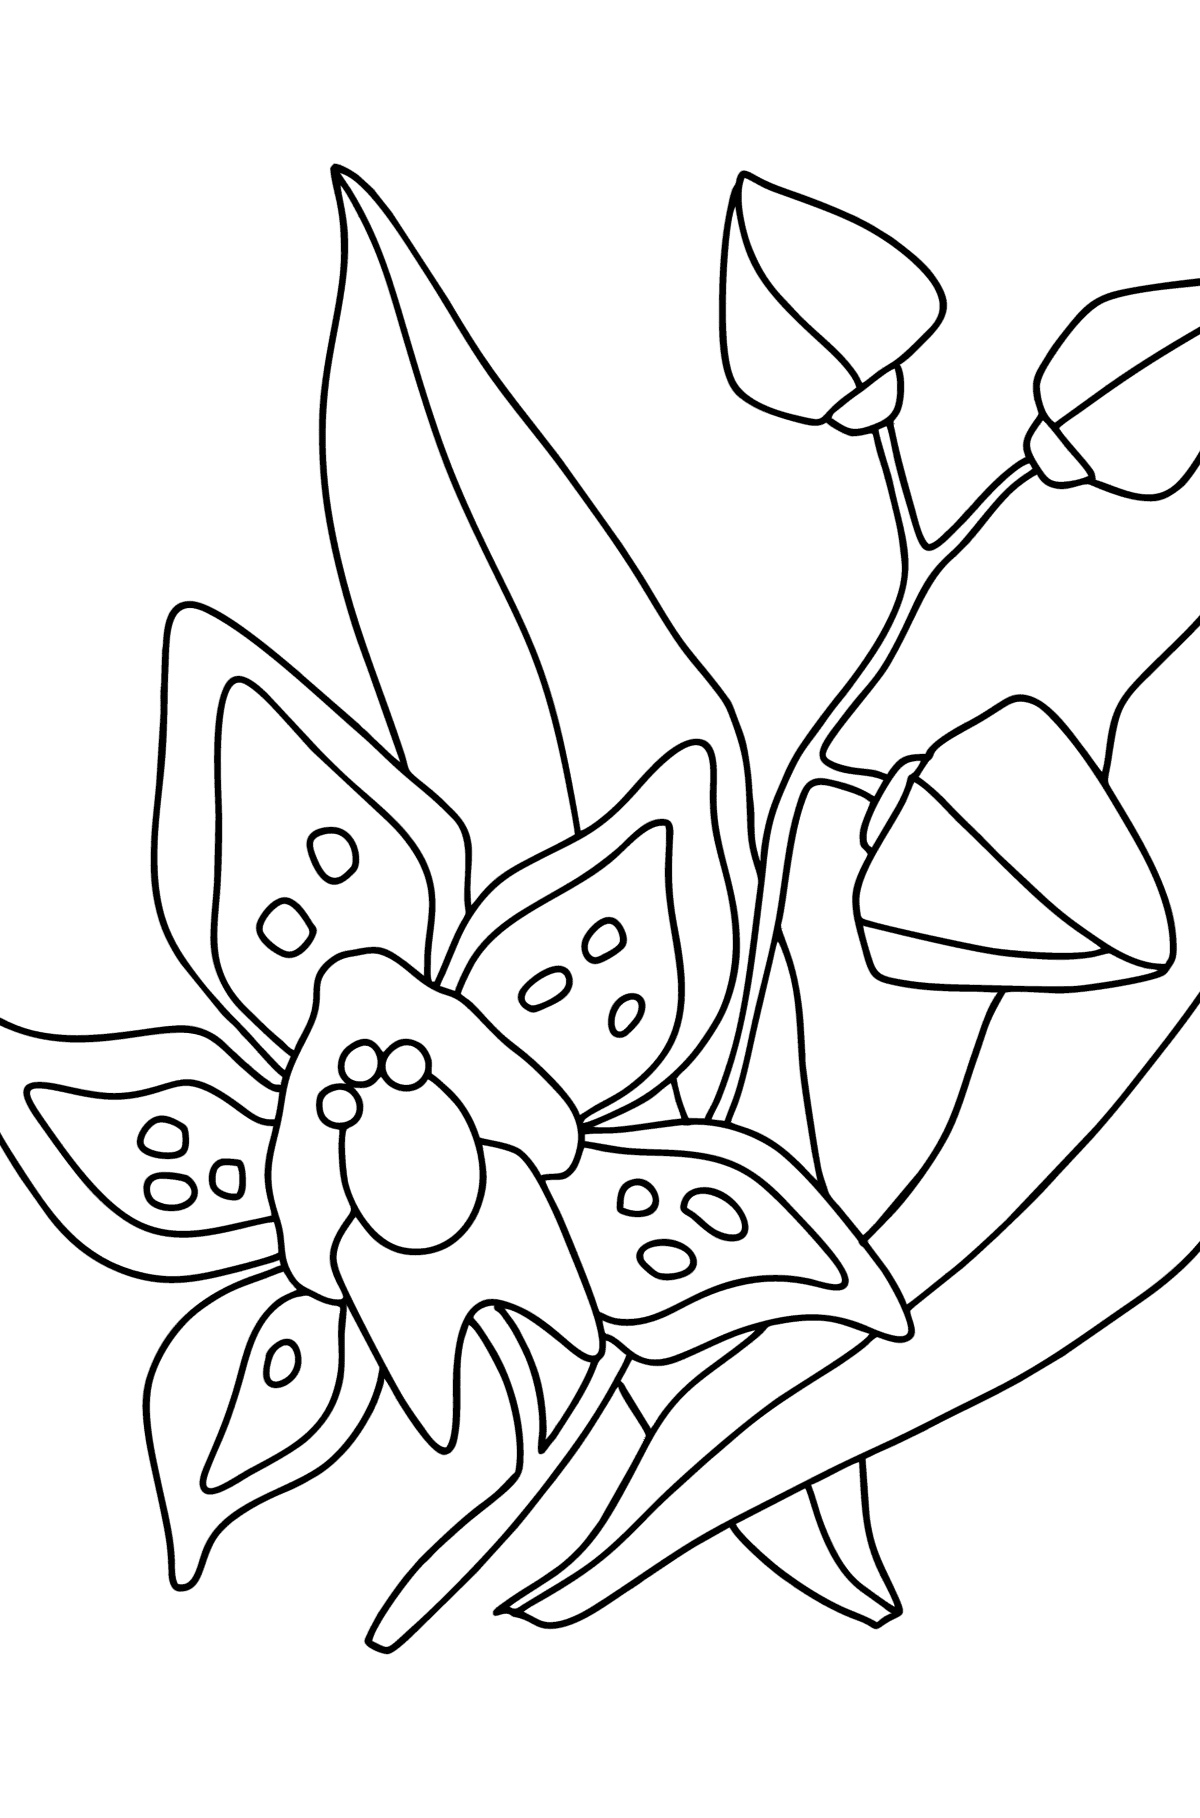 Orchid coloring page - Coloring Pages for Kids